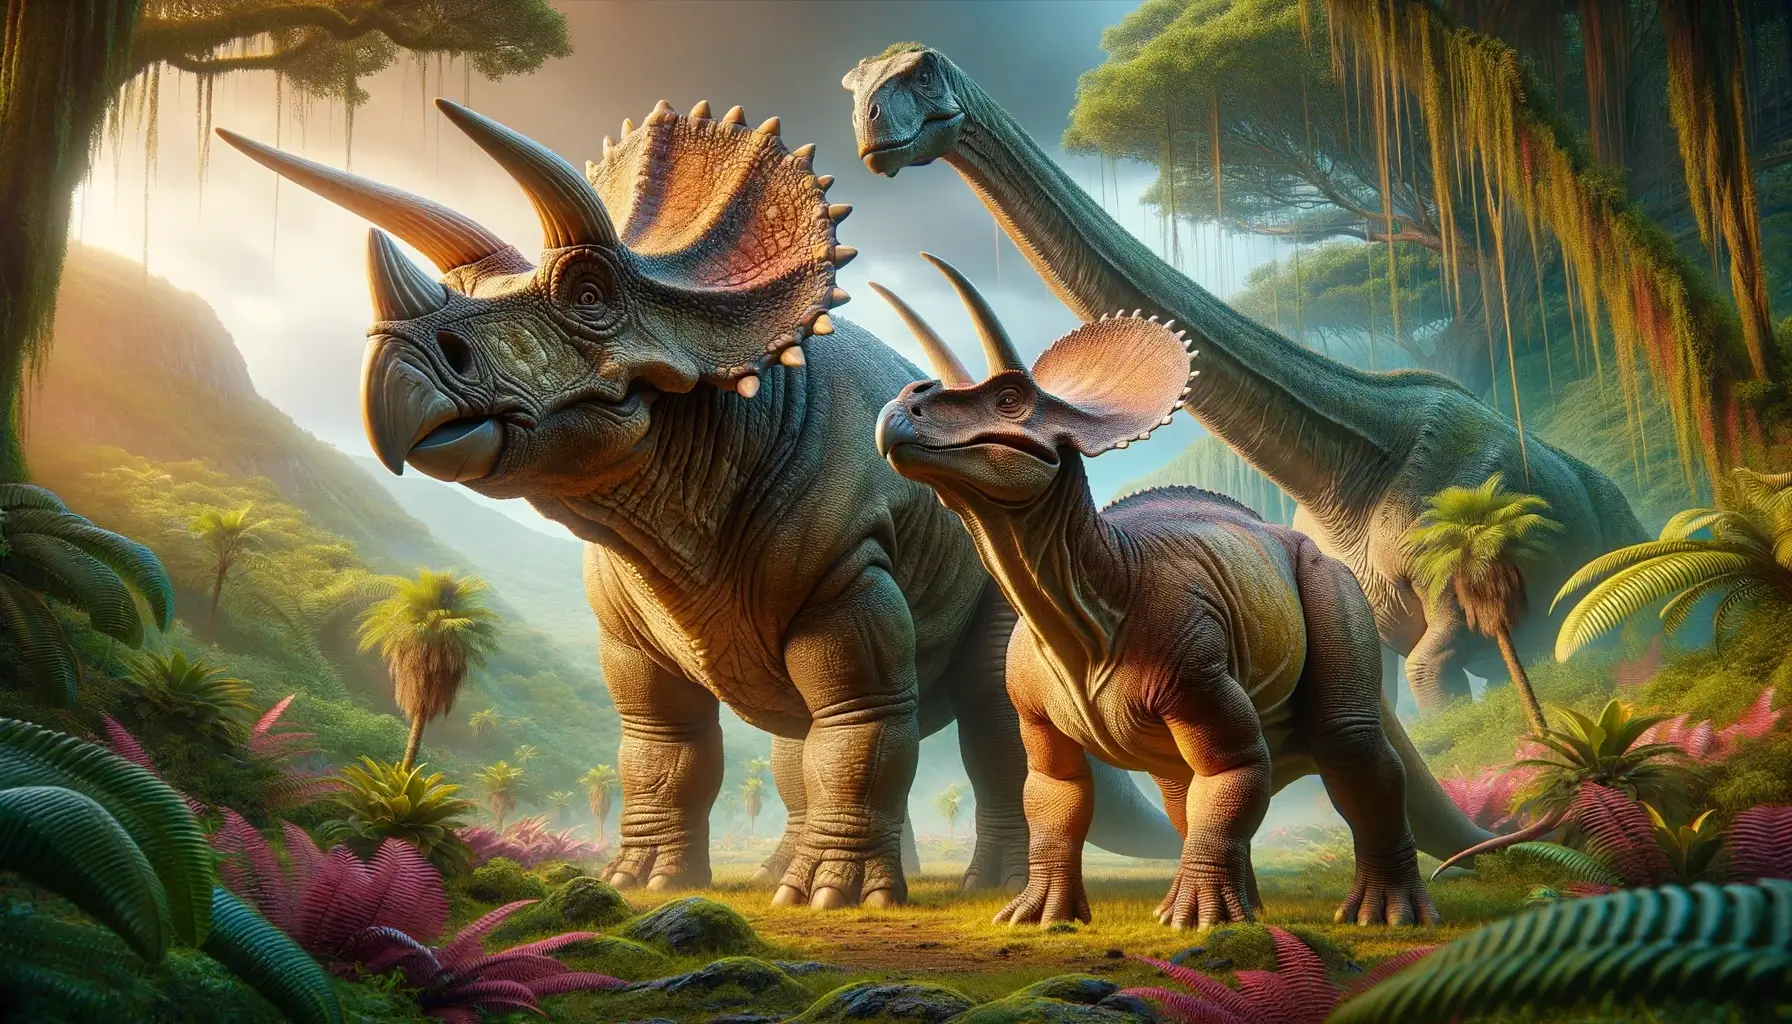 Vibrant setting with Triceratops and Brachiosaurus showcasing differences.